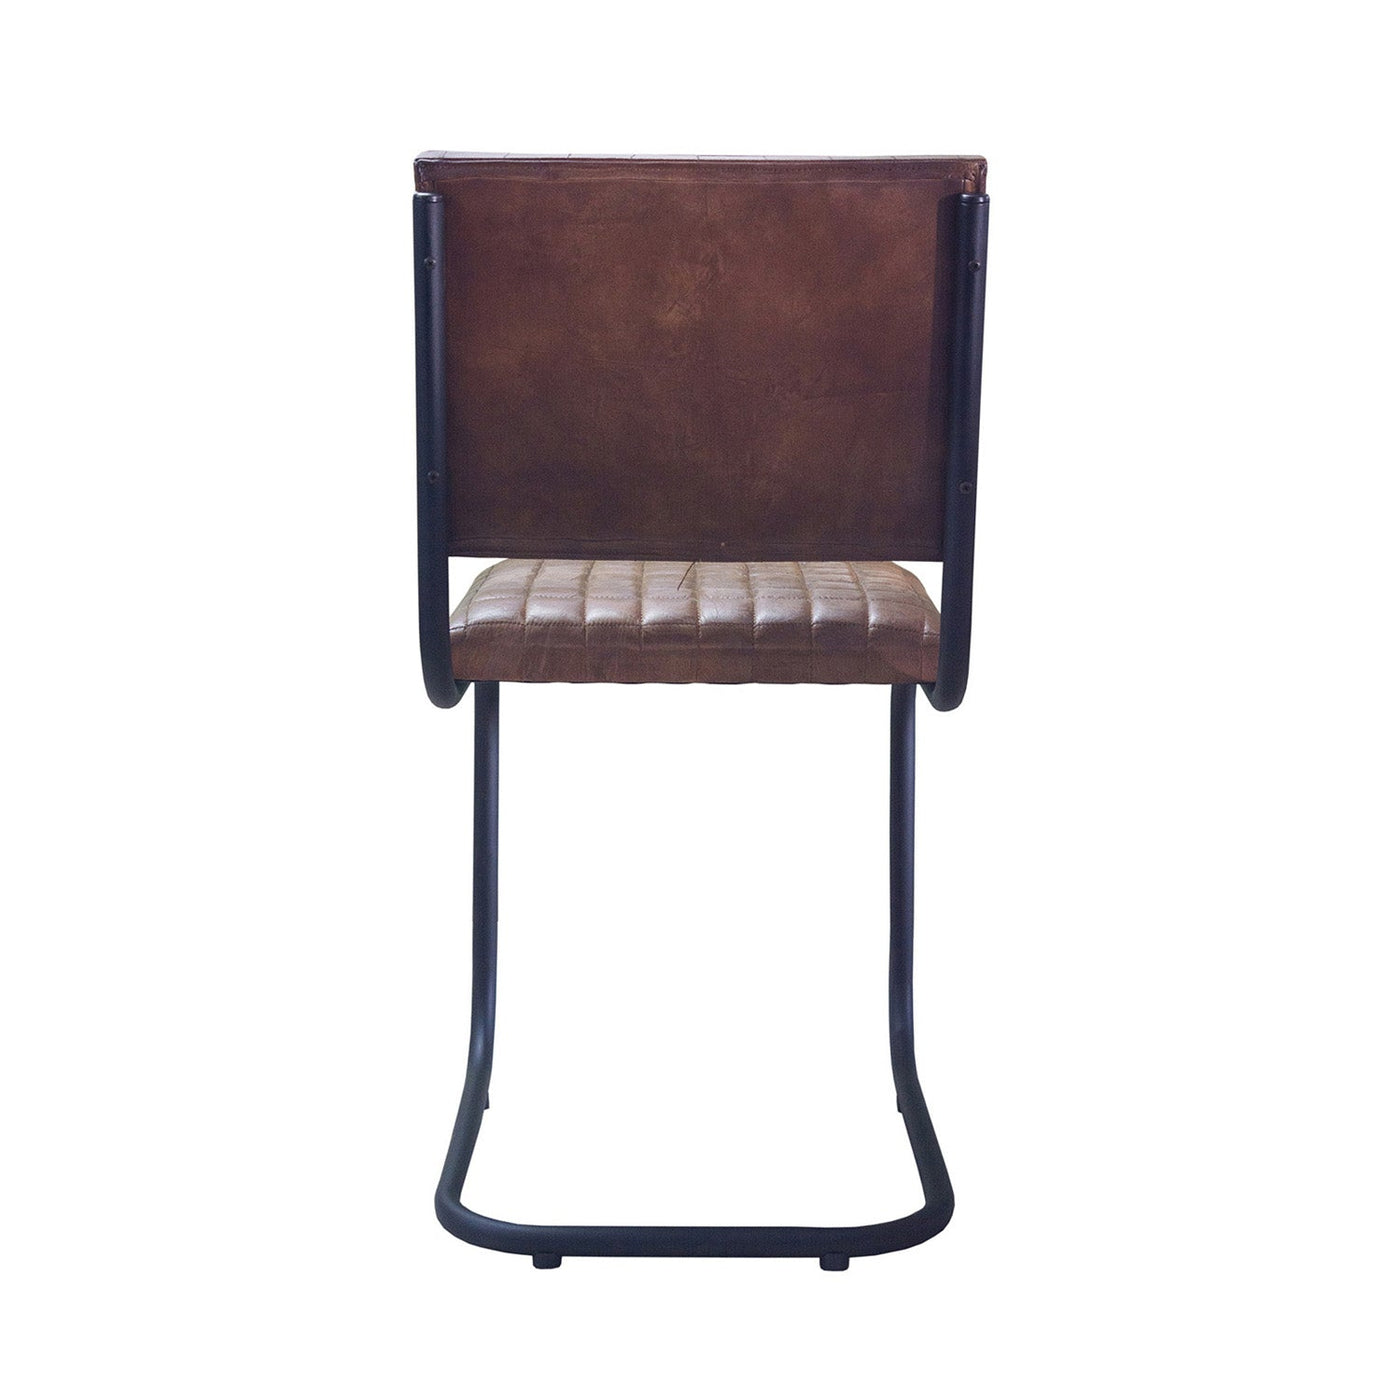 Bailie Buffalo Leather Side Chair in Brown